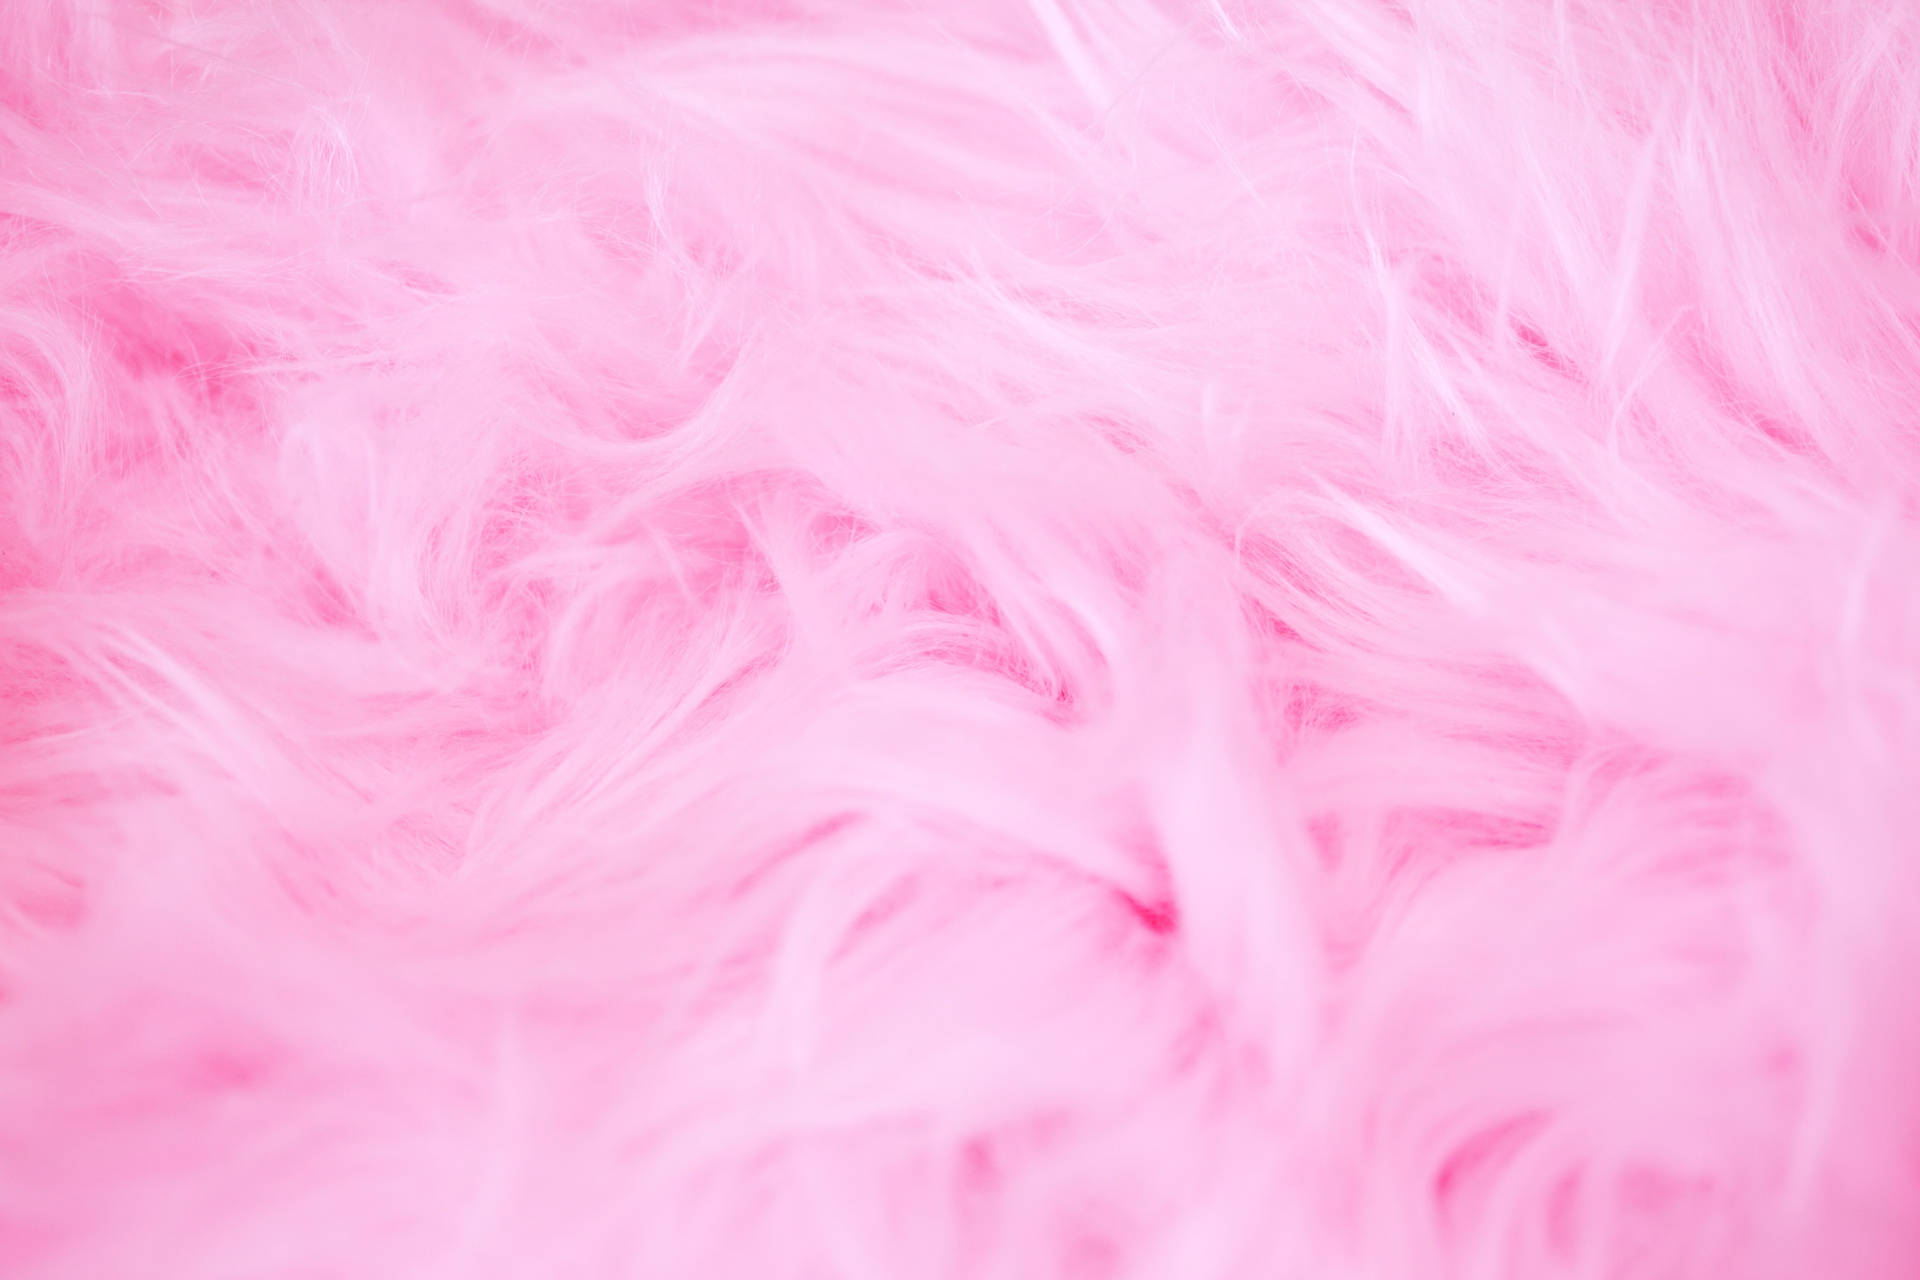 Fluffy Pink Aesthetic Girly Texture Background